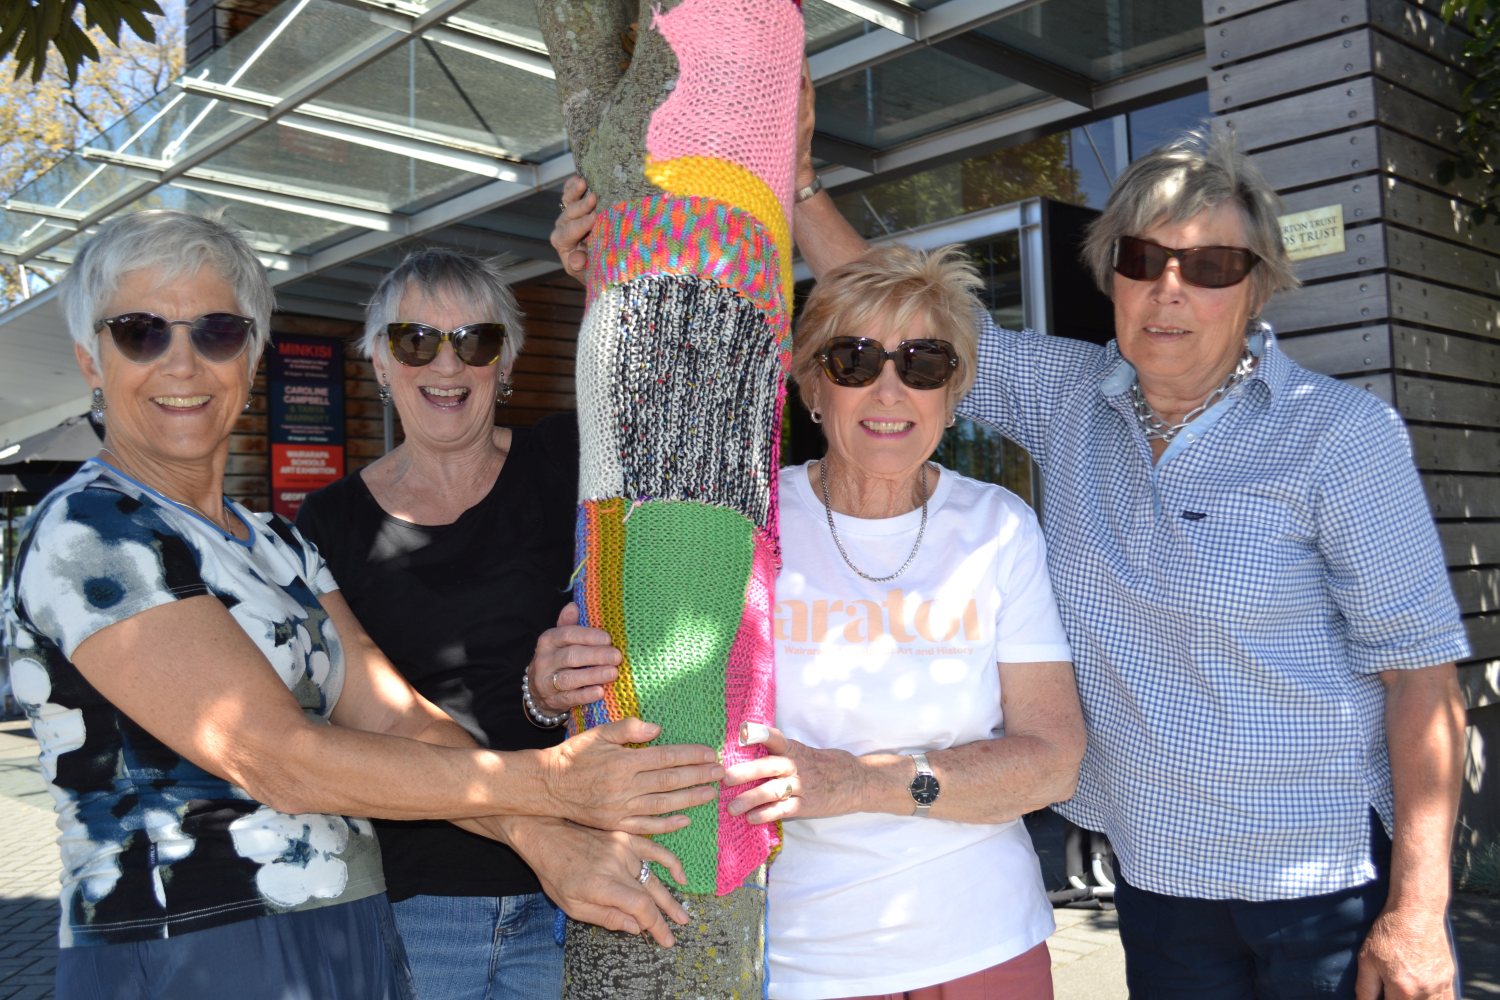 BLOCK PARTY 2018 Volunteers: Donna Burkhart, Sandra Debney, Barb Roydhouse and Megan Payton with the tree they knit-bombed.